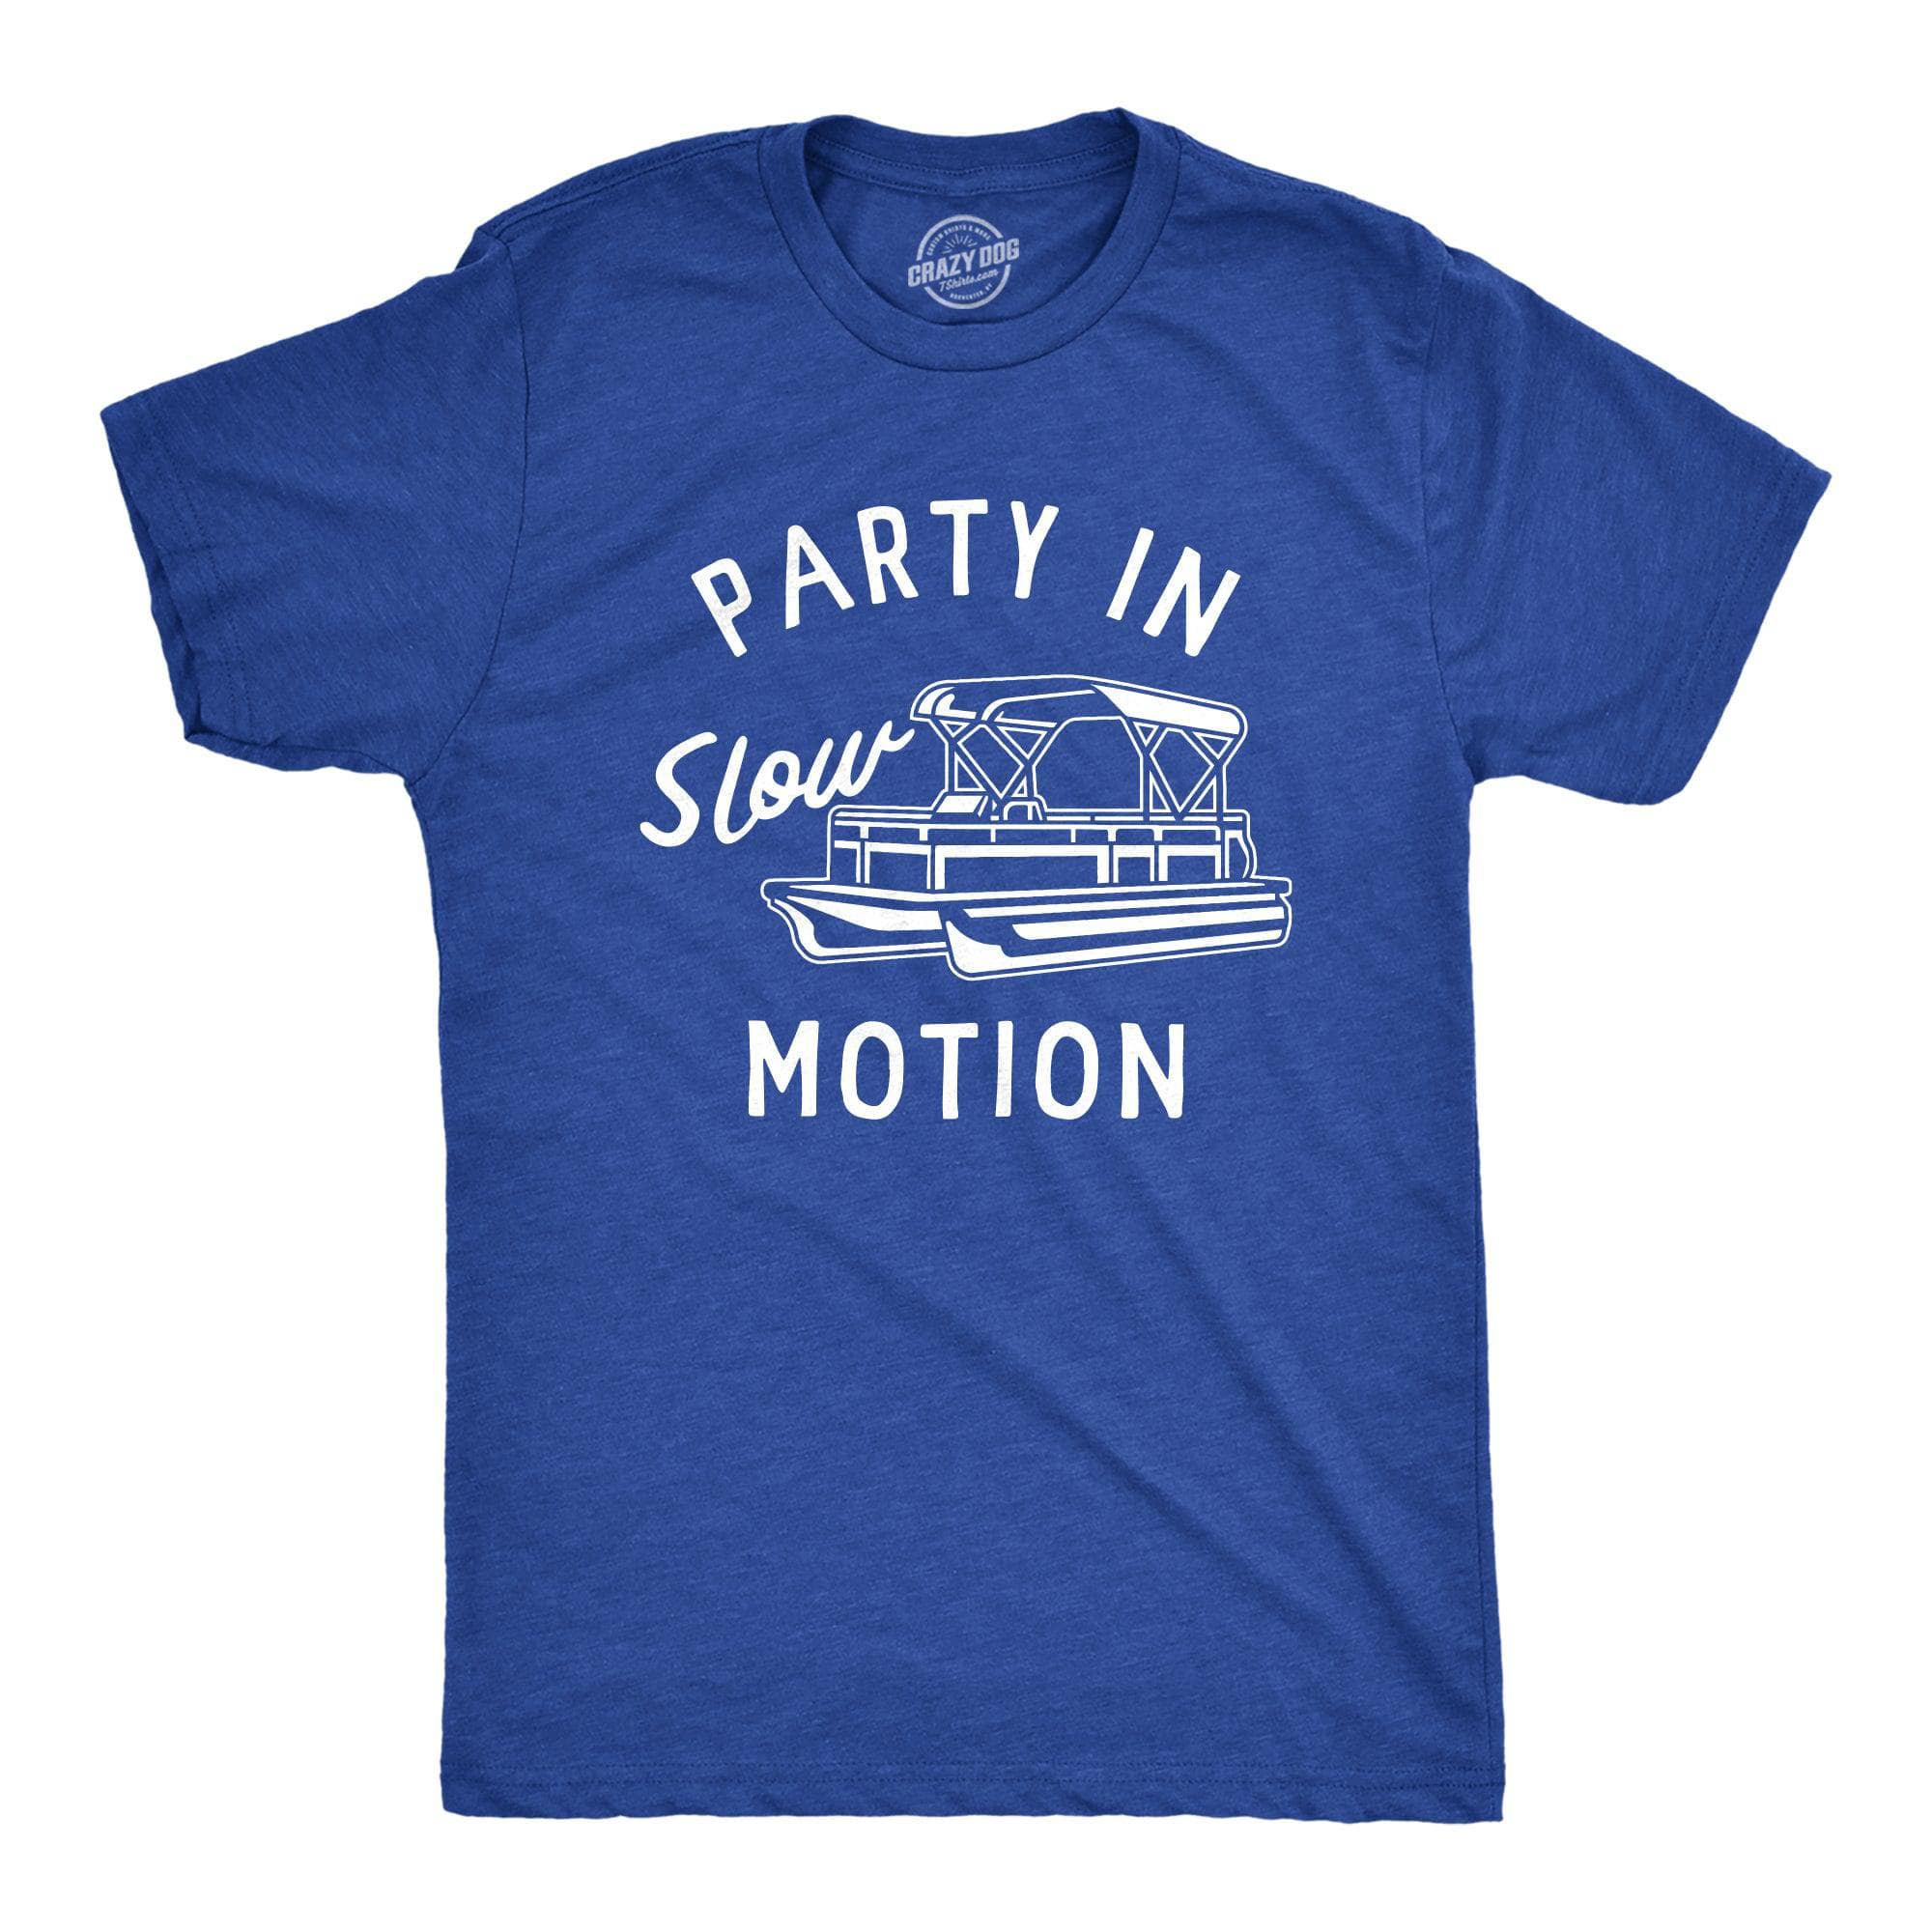 Party In Slow Motion Men's Tshirt  -  Crazy Dog T-Shirts